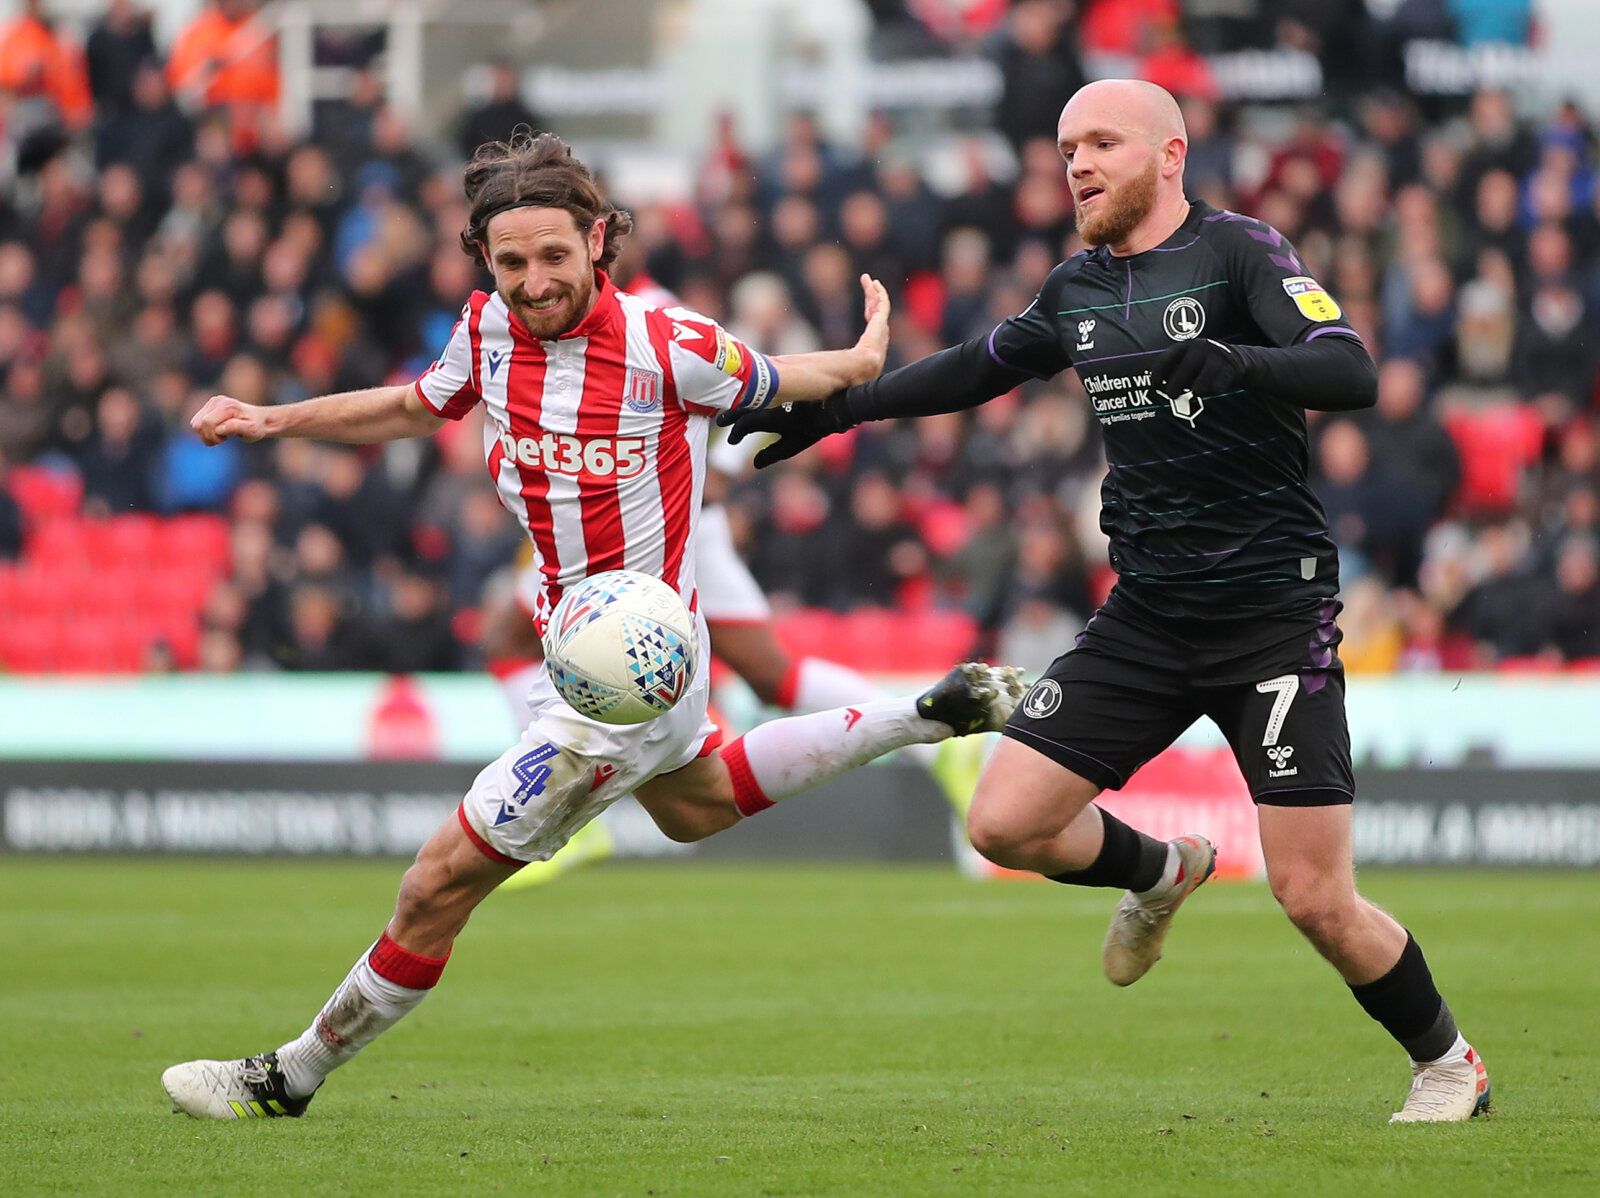 Soccer Football - Championship - Stoke City v Charlton Athletic - bet365 Stadium, Stoke-on-Trent, Britain - February 8, 2020  Stoke City's Joe Allen in action with Charlton Atheletic's Jonathan Williams  Action Images/Molly Darlington  EDITORIAL USE ONLY. No use with unauthorized audio, video, data, fixture lists, club/league logos or 